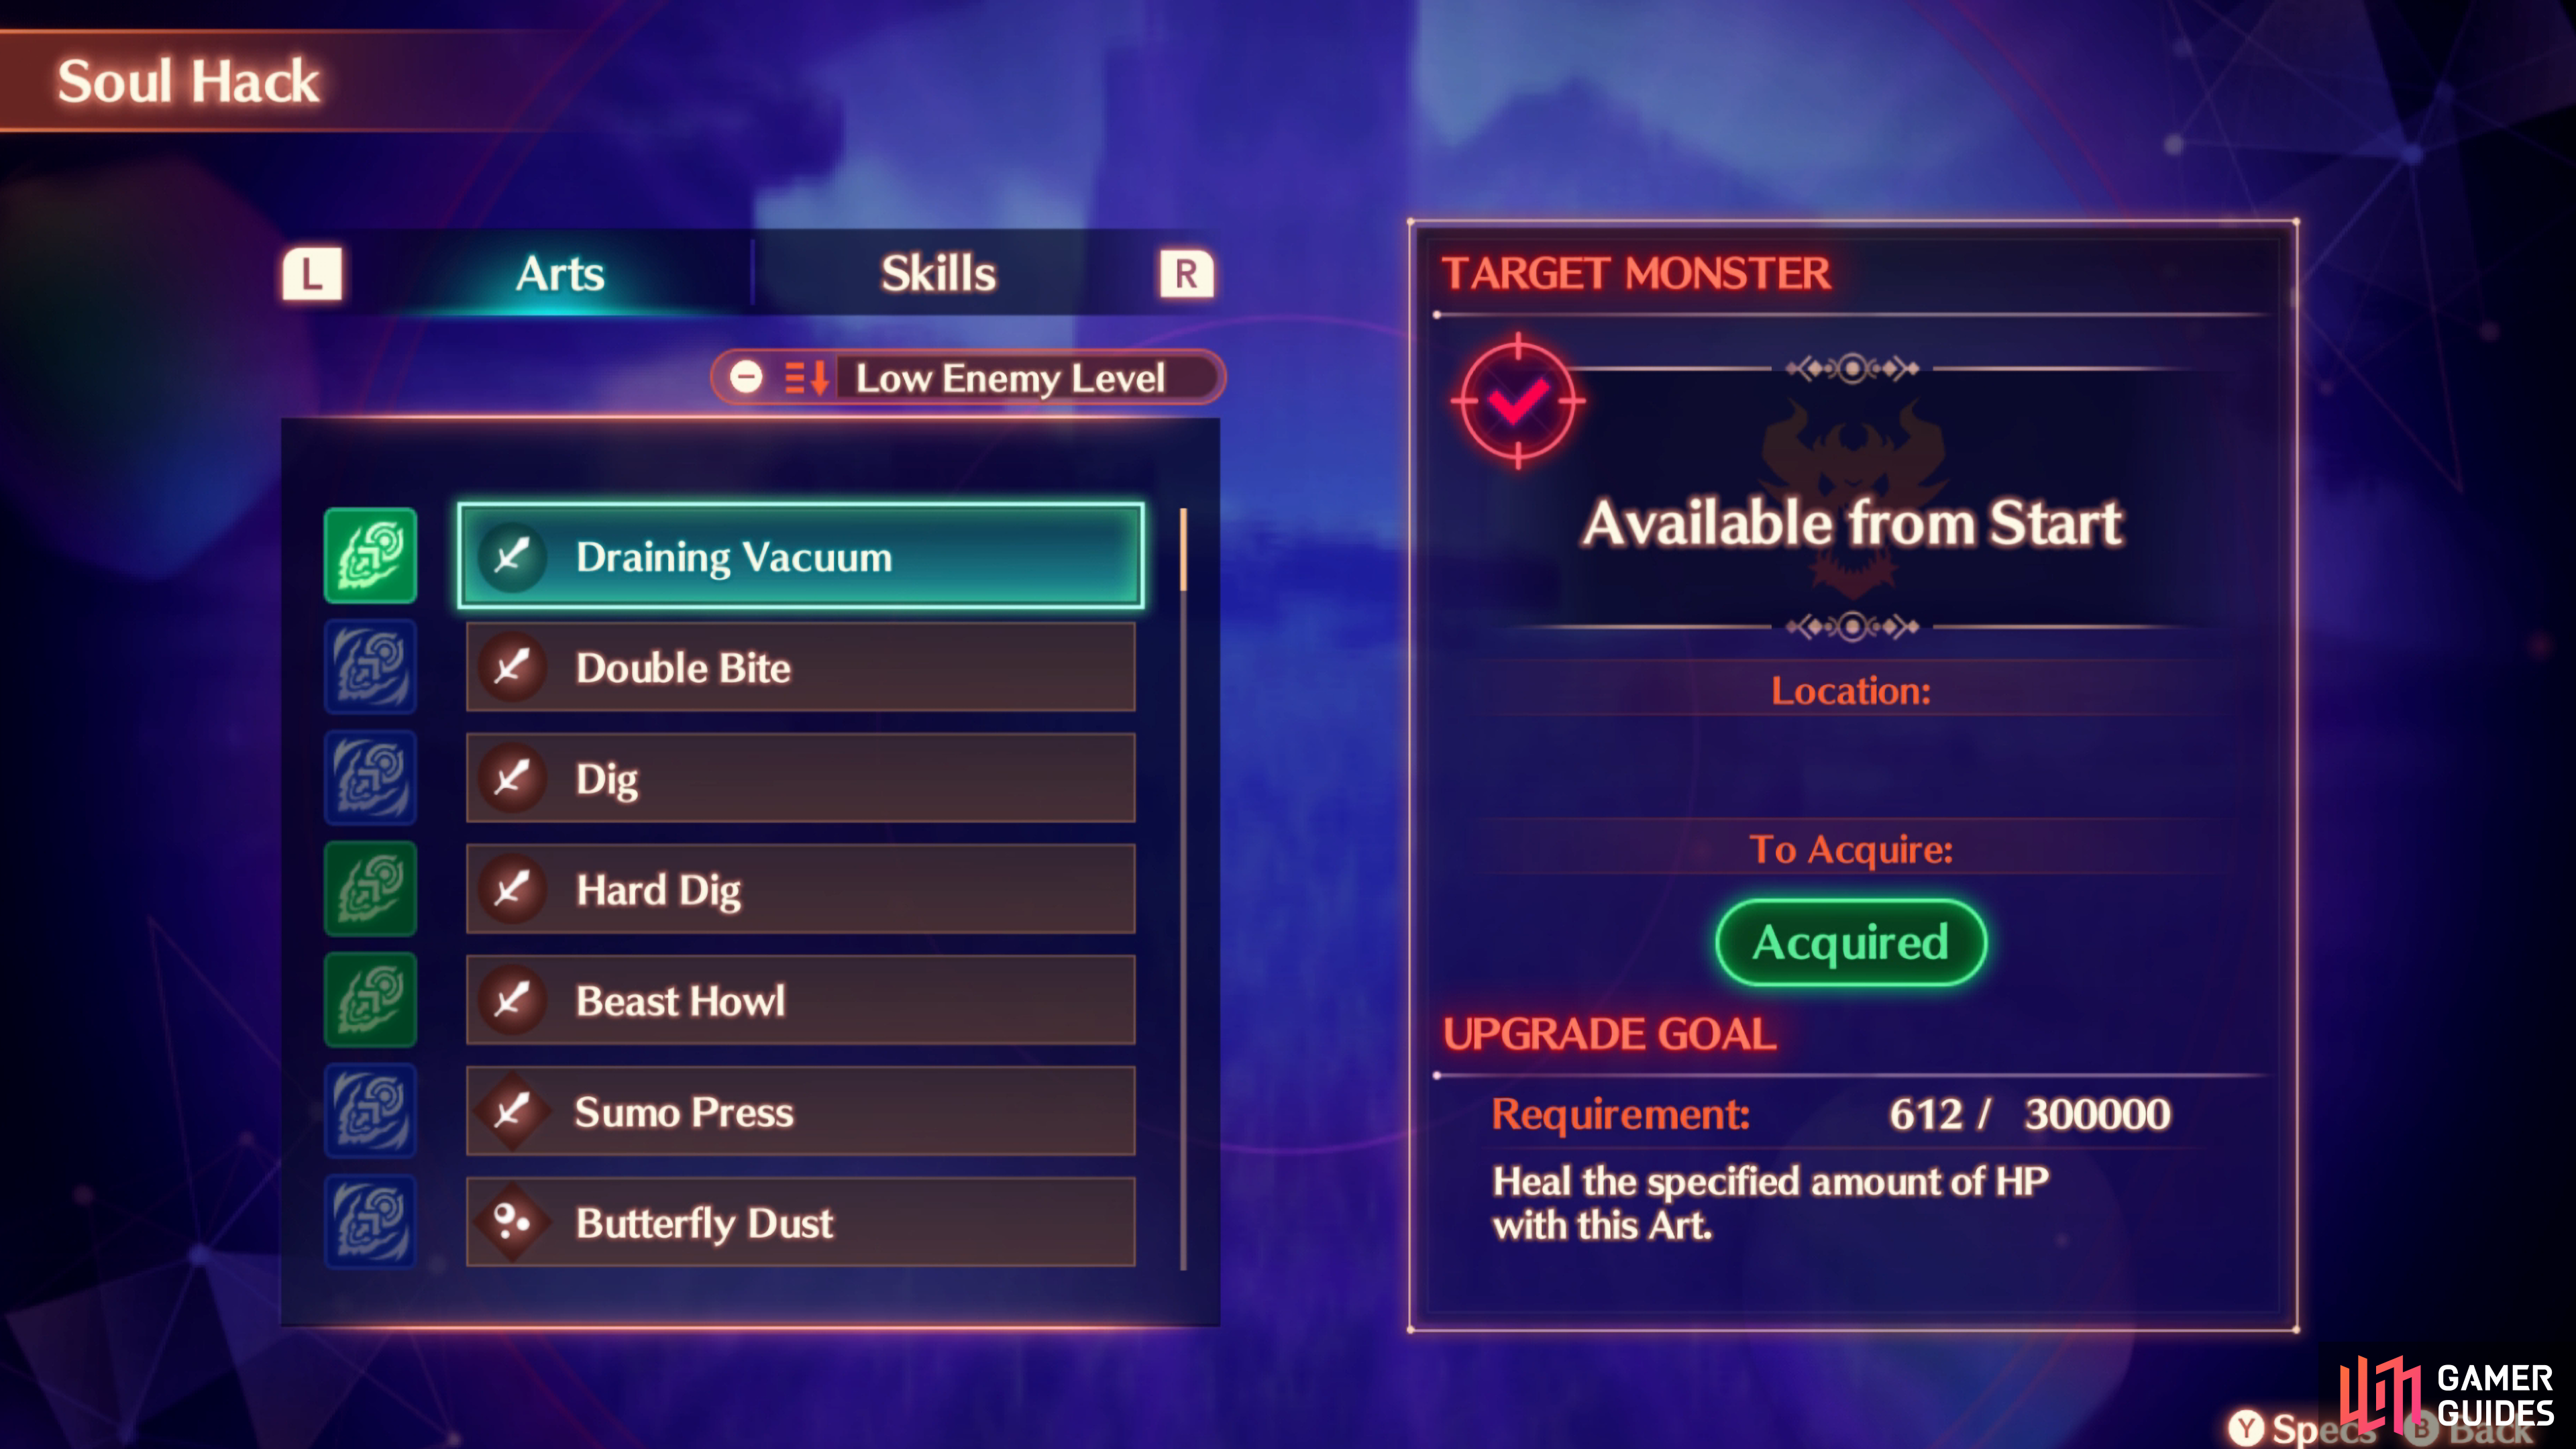 You can find what Arts you’ve acquired by going to the Heroes menu, and accessing the Soul Hack List by pressing Y.